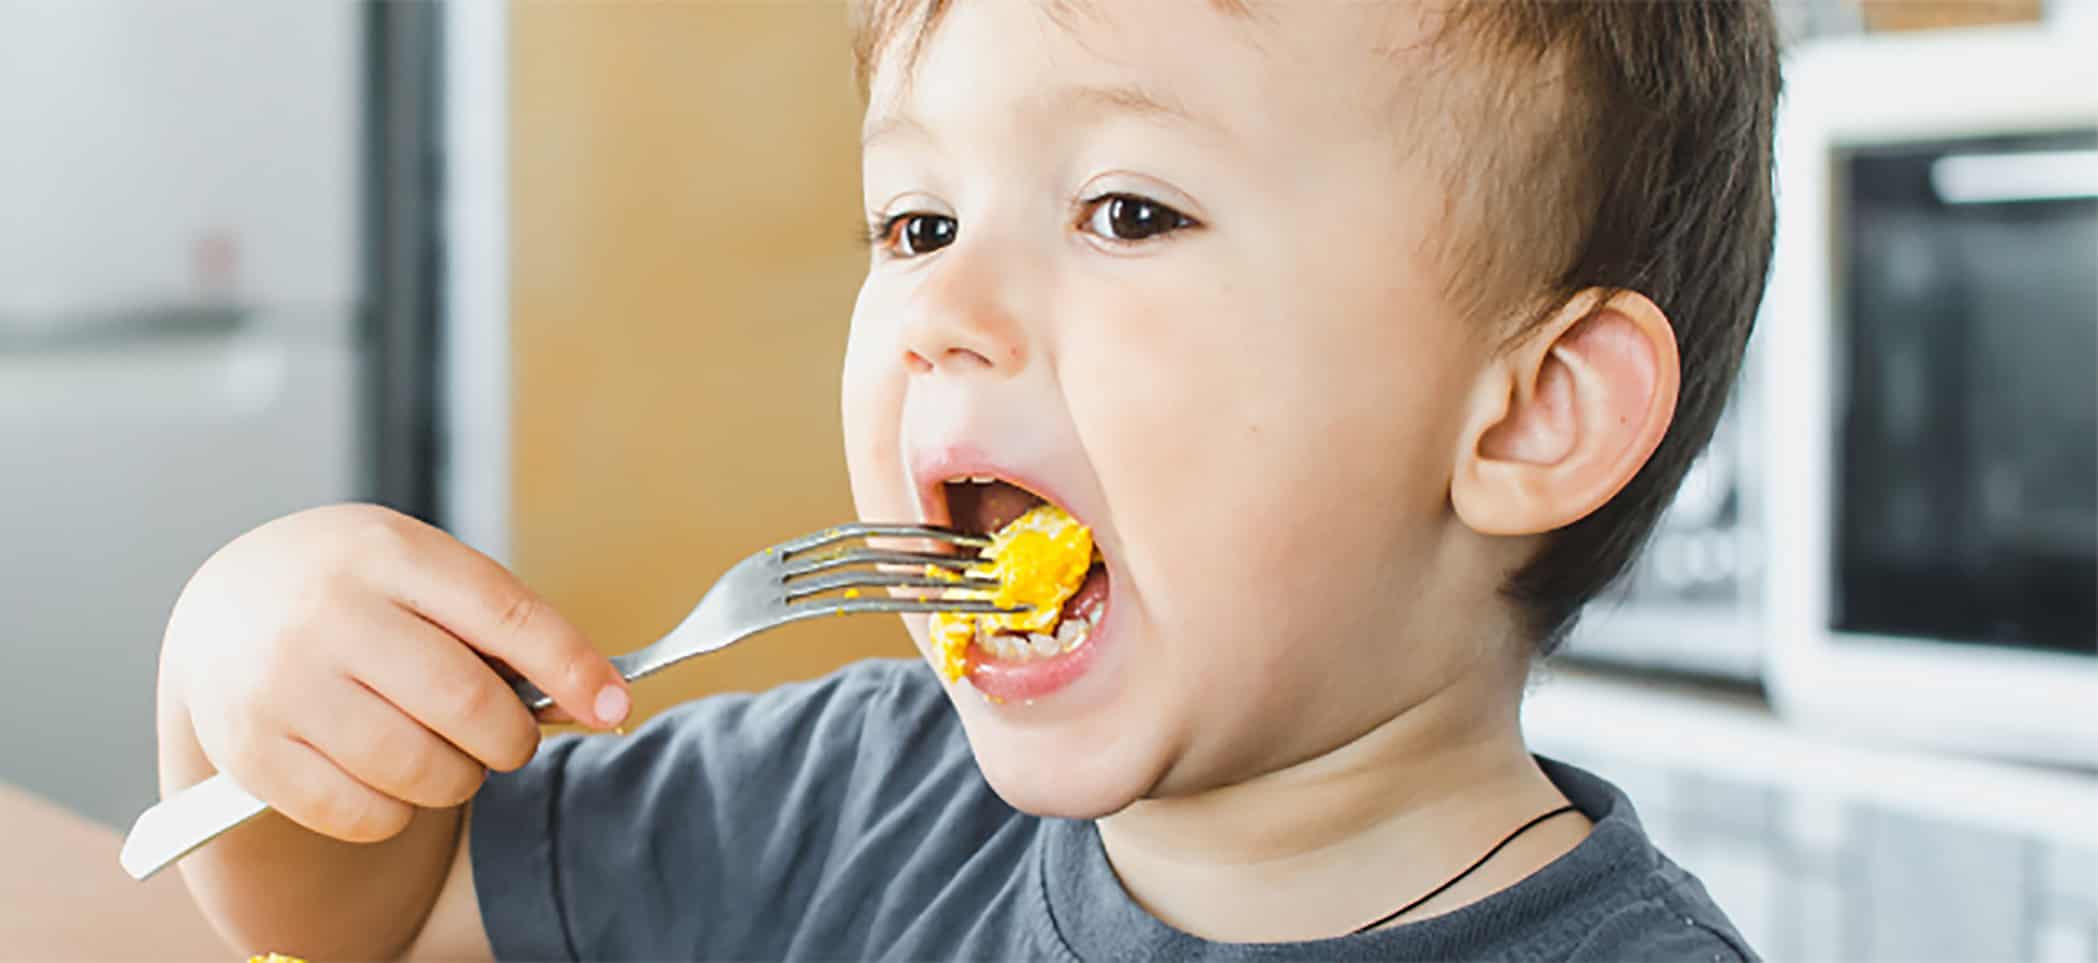 a child puts a forkful of food in his mouth